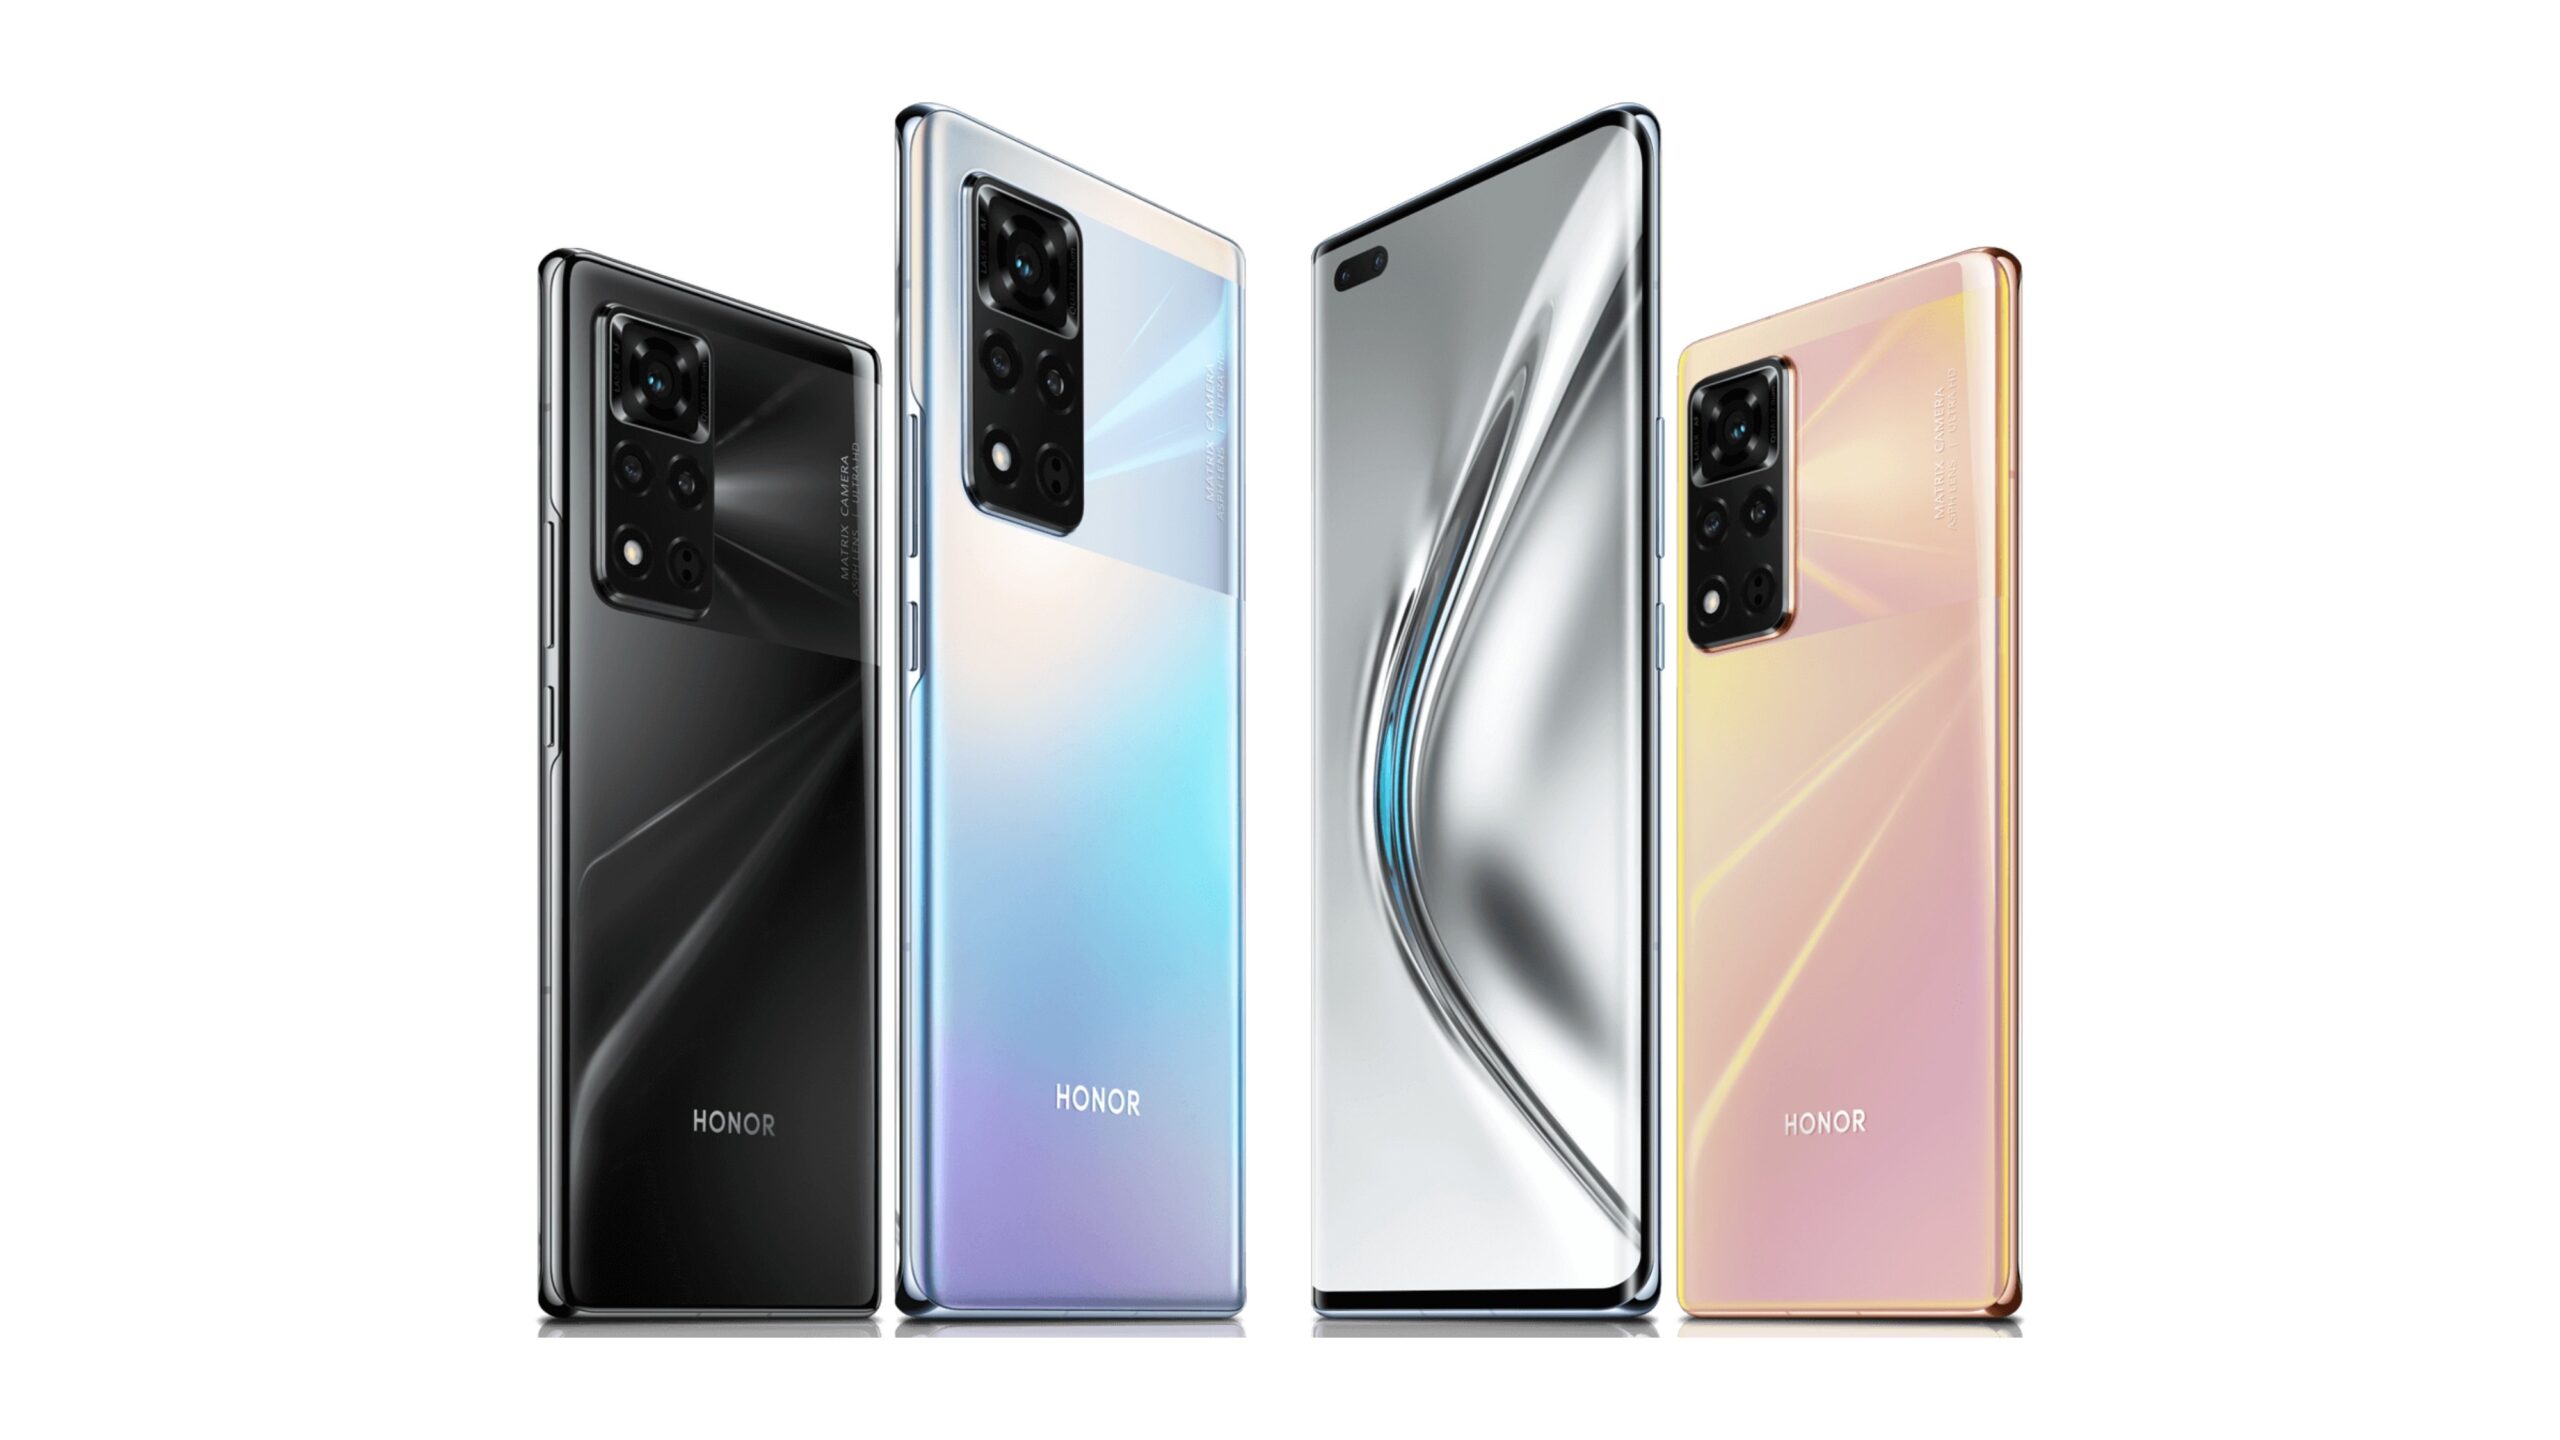 HONOR V40 and four other phones have cleared EEC certification ahead of global launch